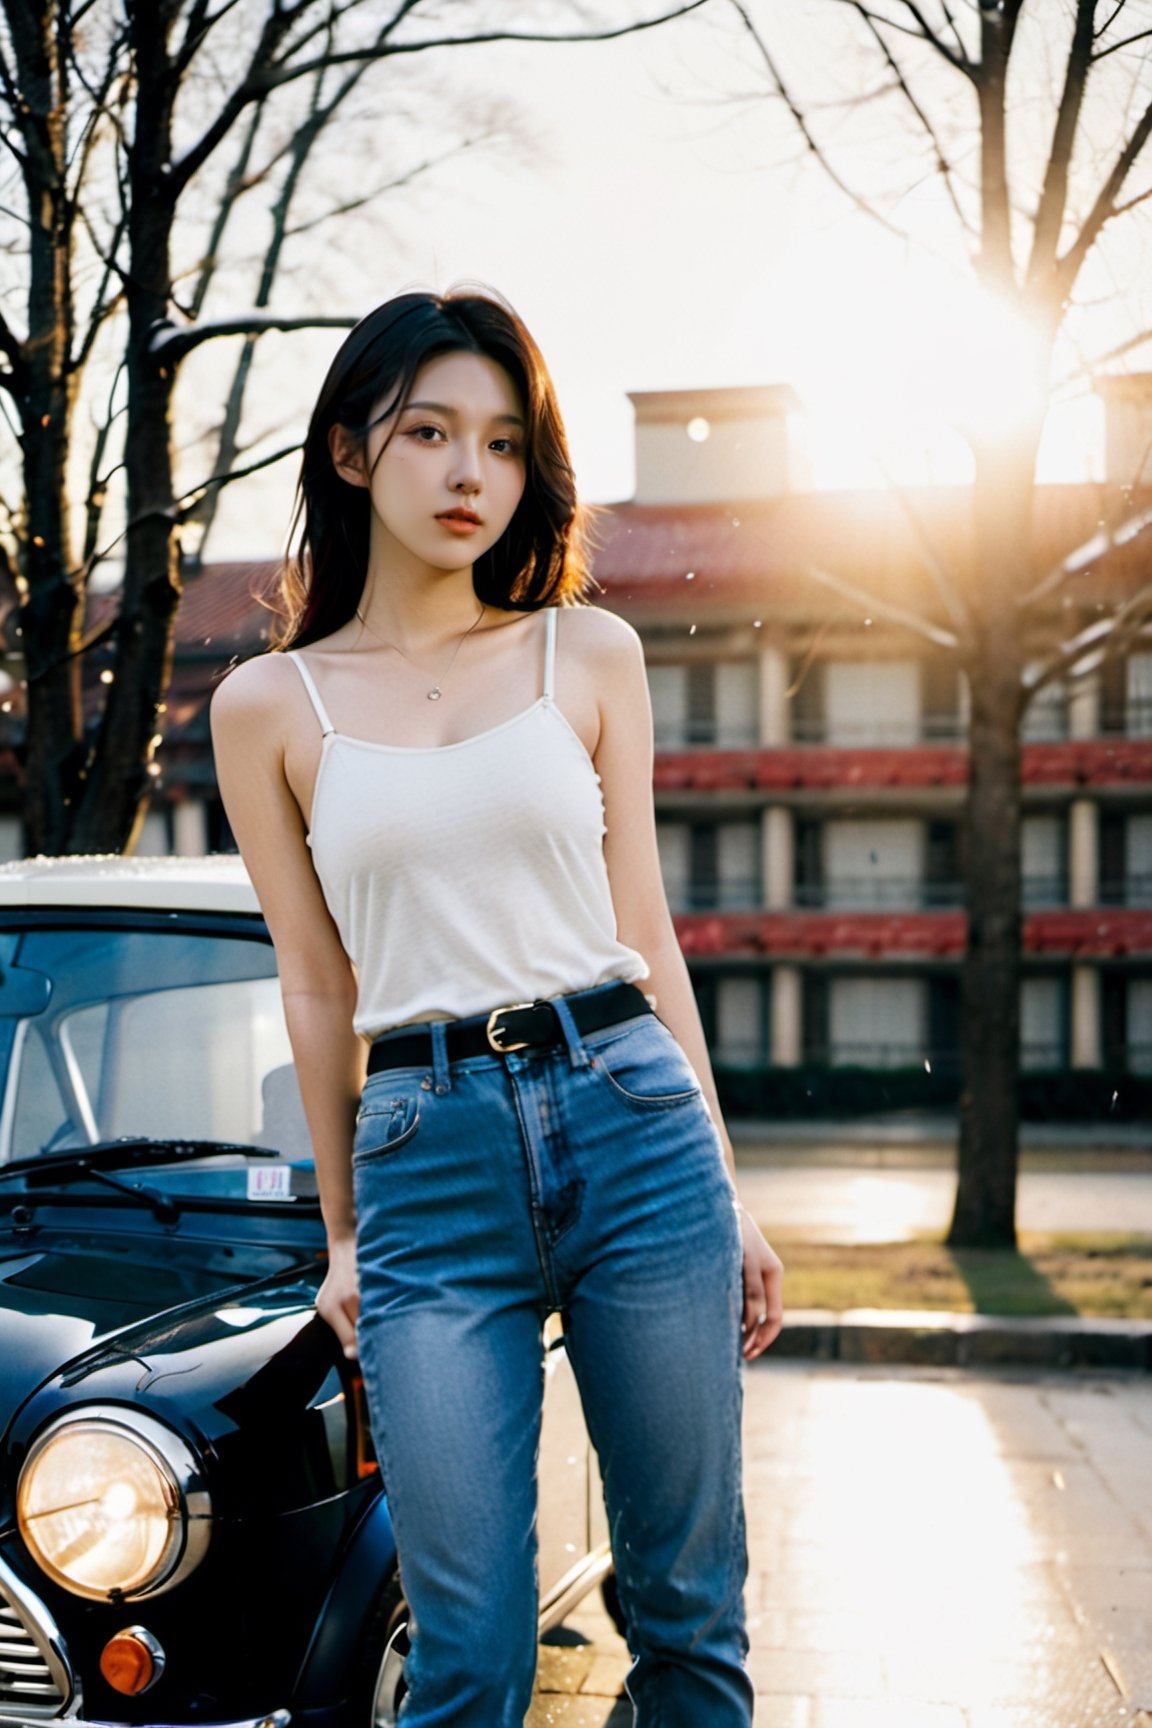 xxmix_girl, 1girl,19 years old,beautiful sexy korean girl ,wet body, seductive pose,sunset light, in front of an old mini cooper car,no smile,cool,falling_snow
